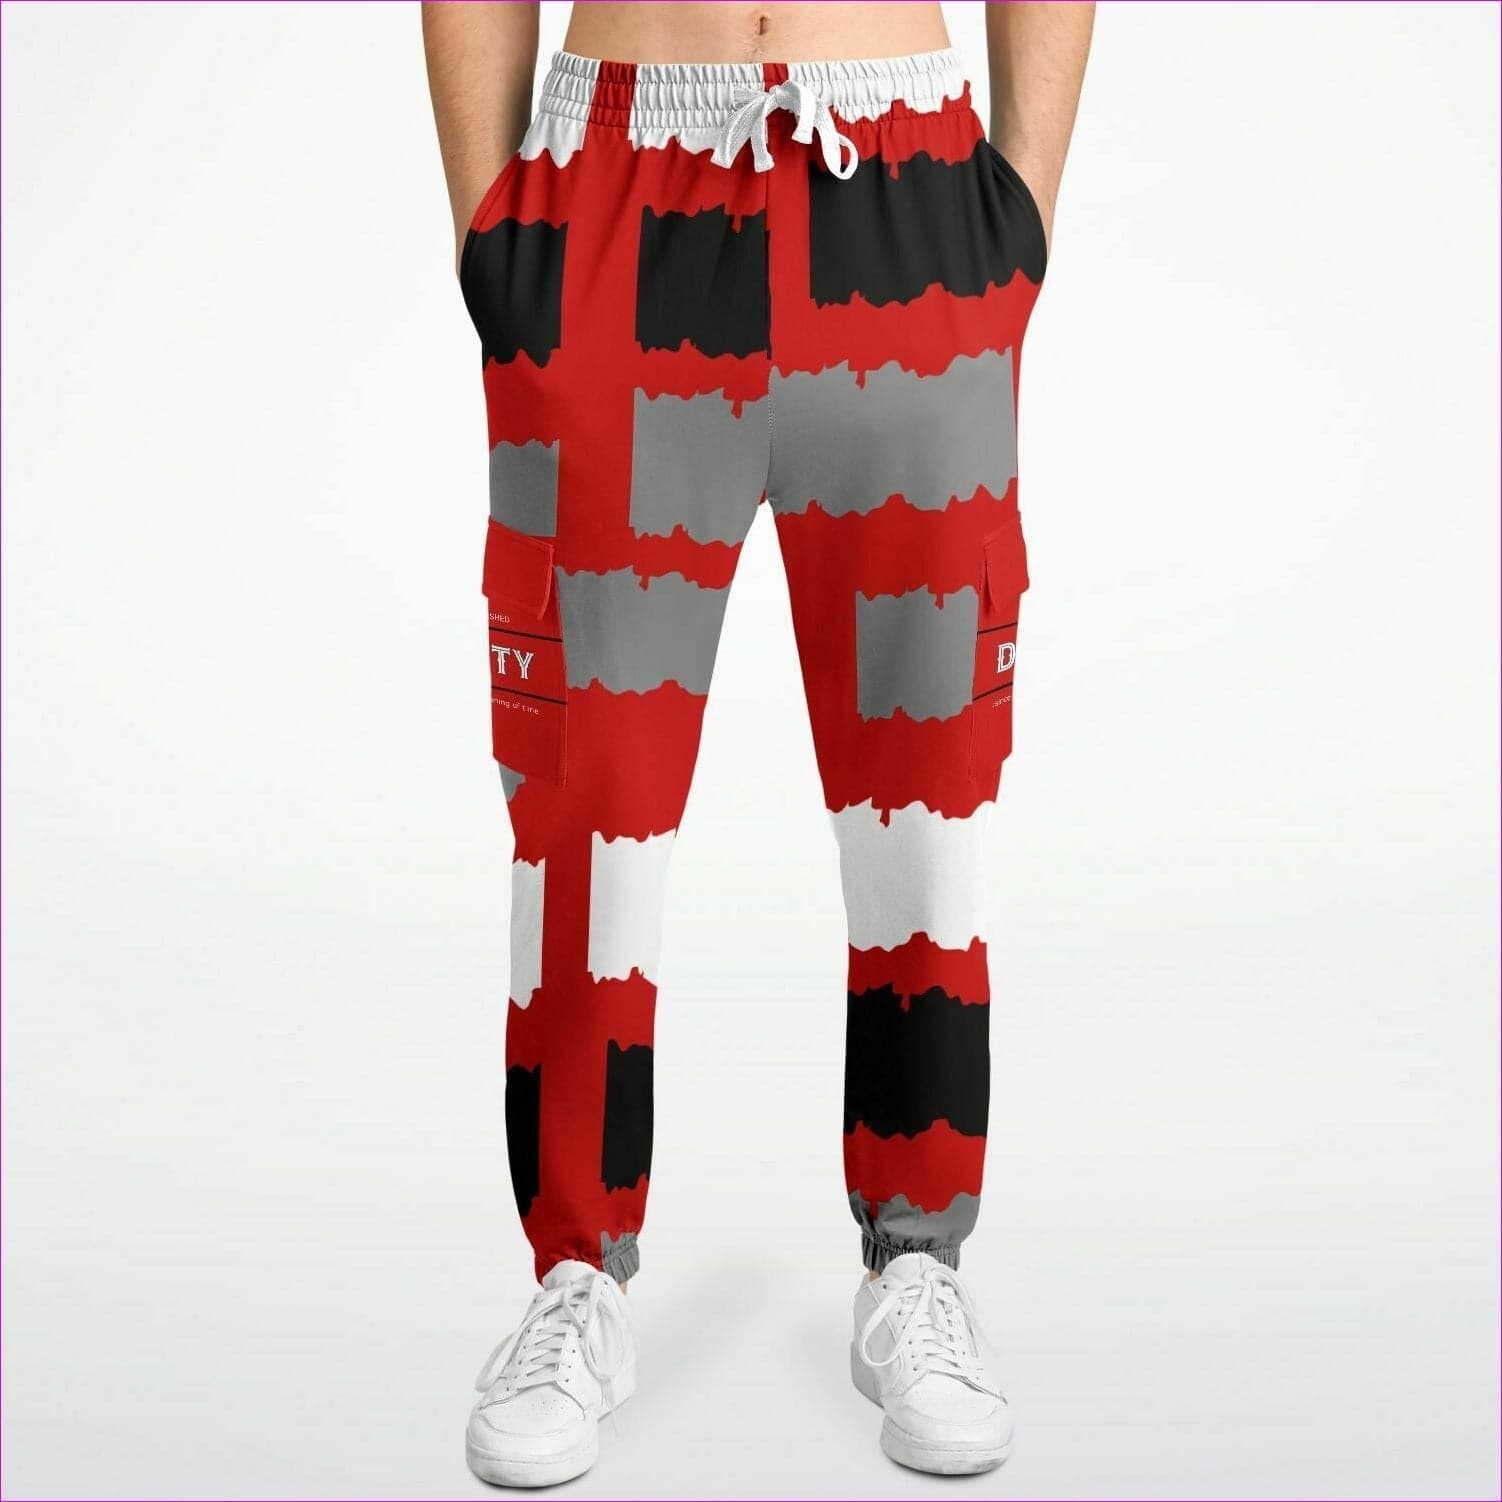 Deity Premium Cargo Sweatpants in Red - Fashion Cargo Sweatpants - AOP at TFC&H Co.